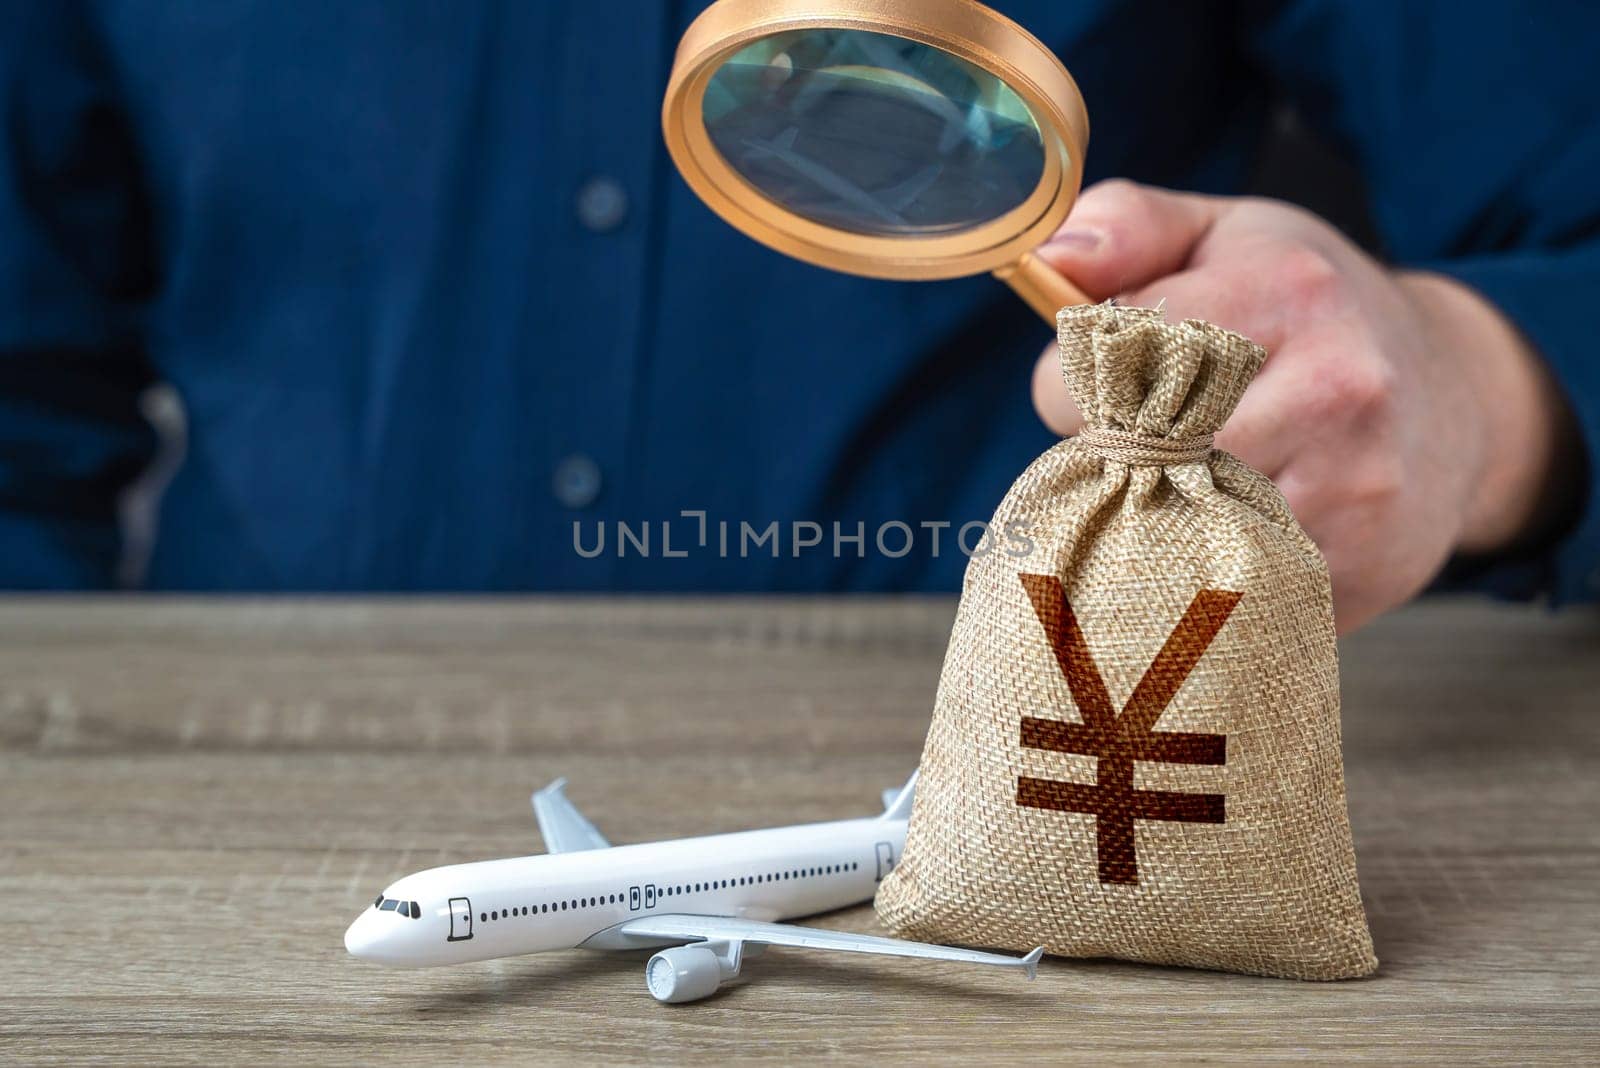 Airplane and chinese yuan or japanese yen money bag under investigation. Economic impact of aviation industry. Payment of taxes, fees and excise taxes. Measure impact on local economy. by iLixe48